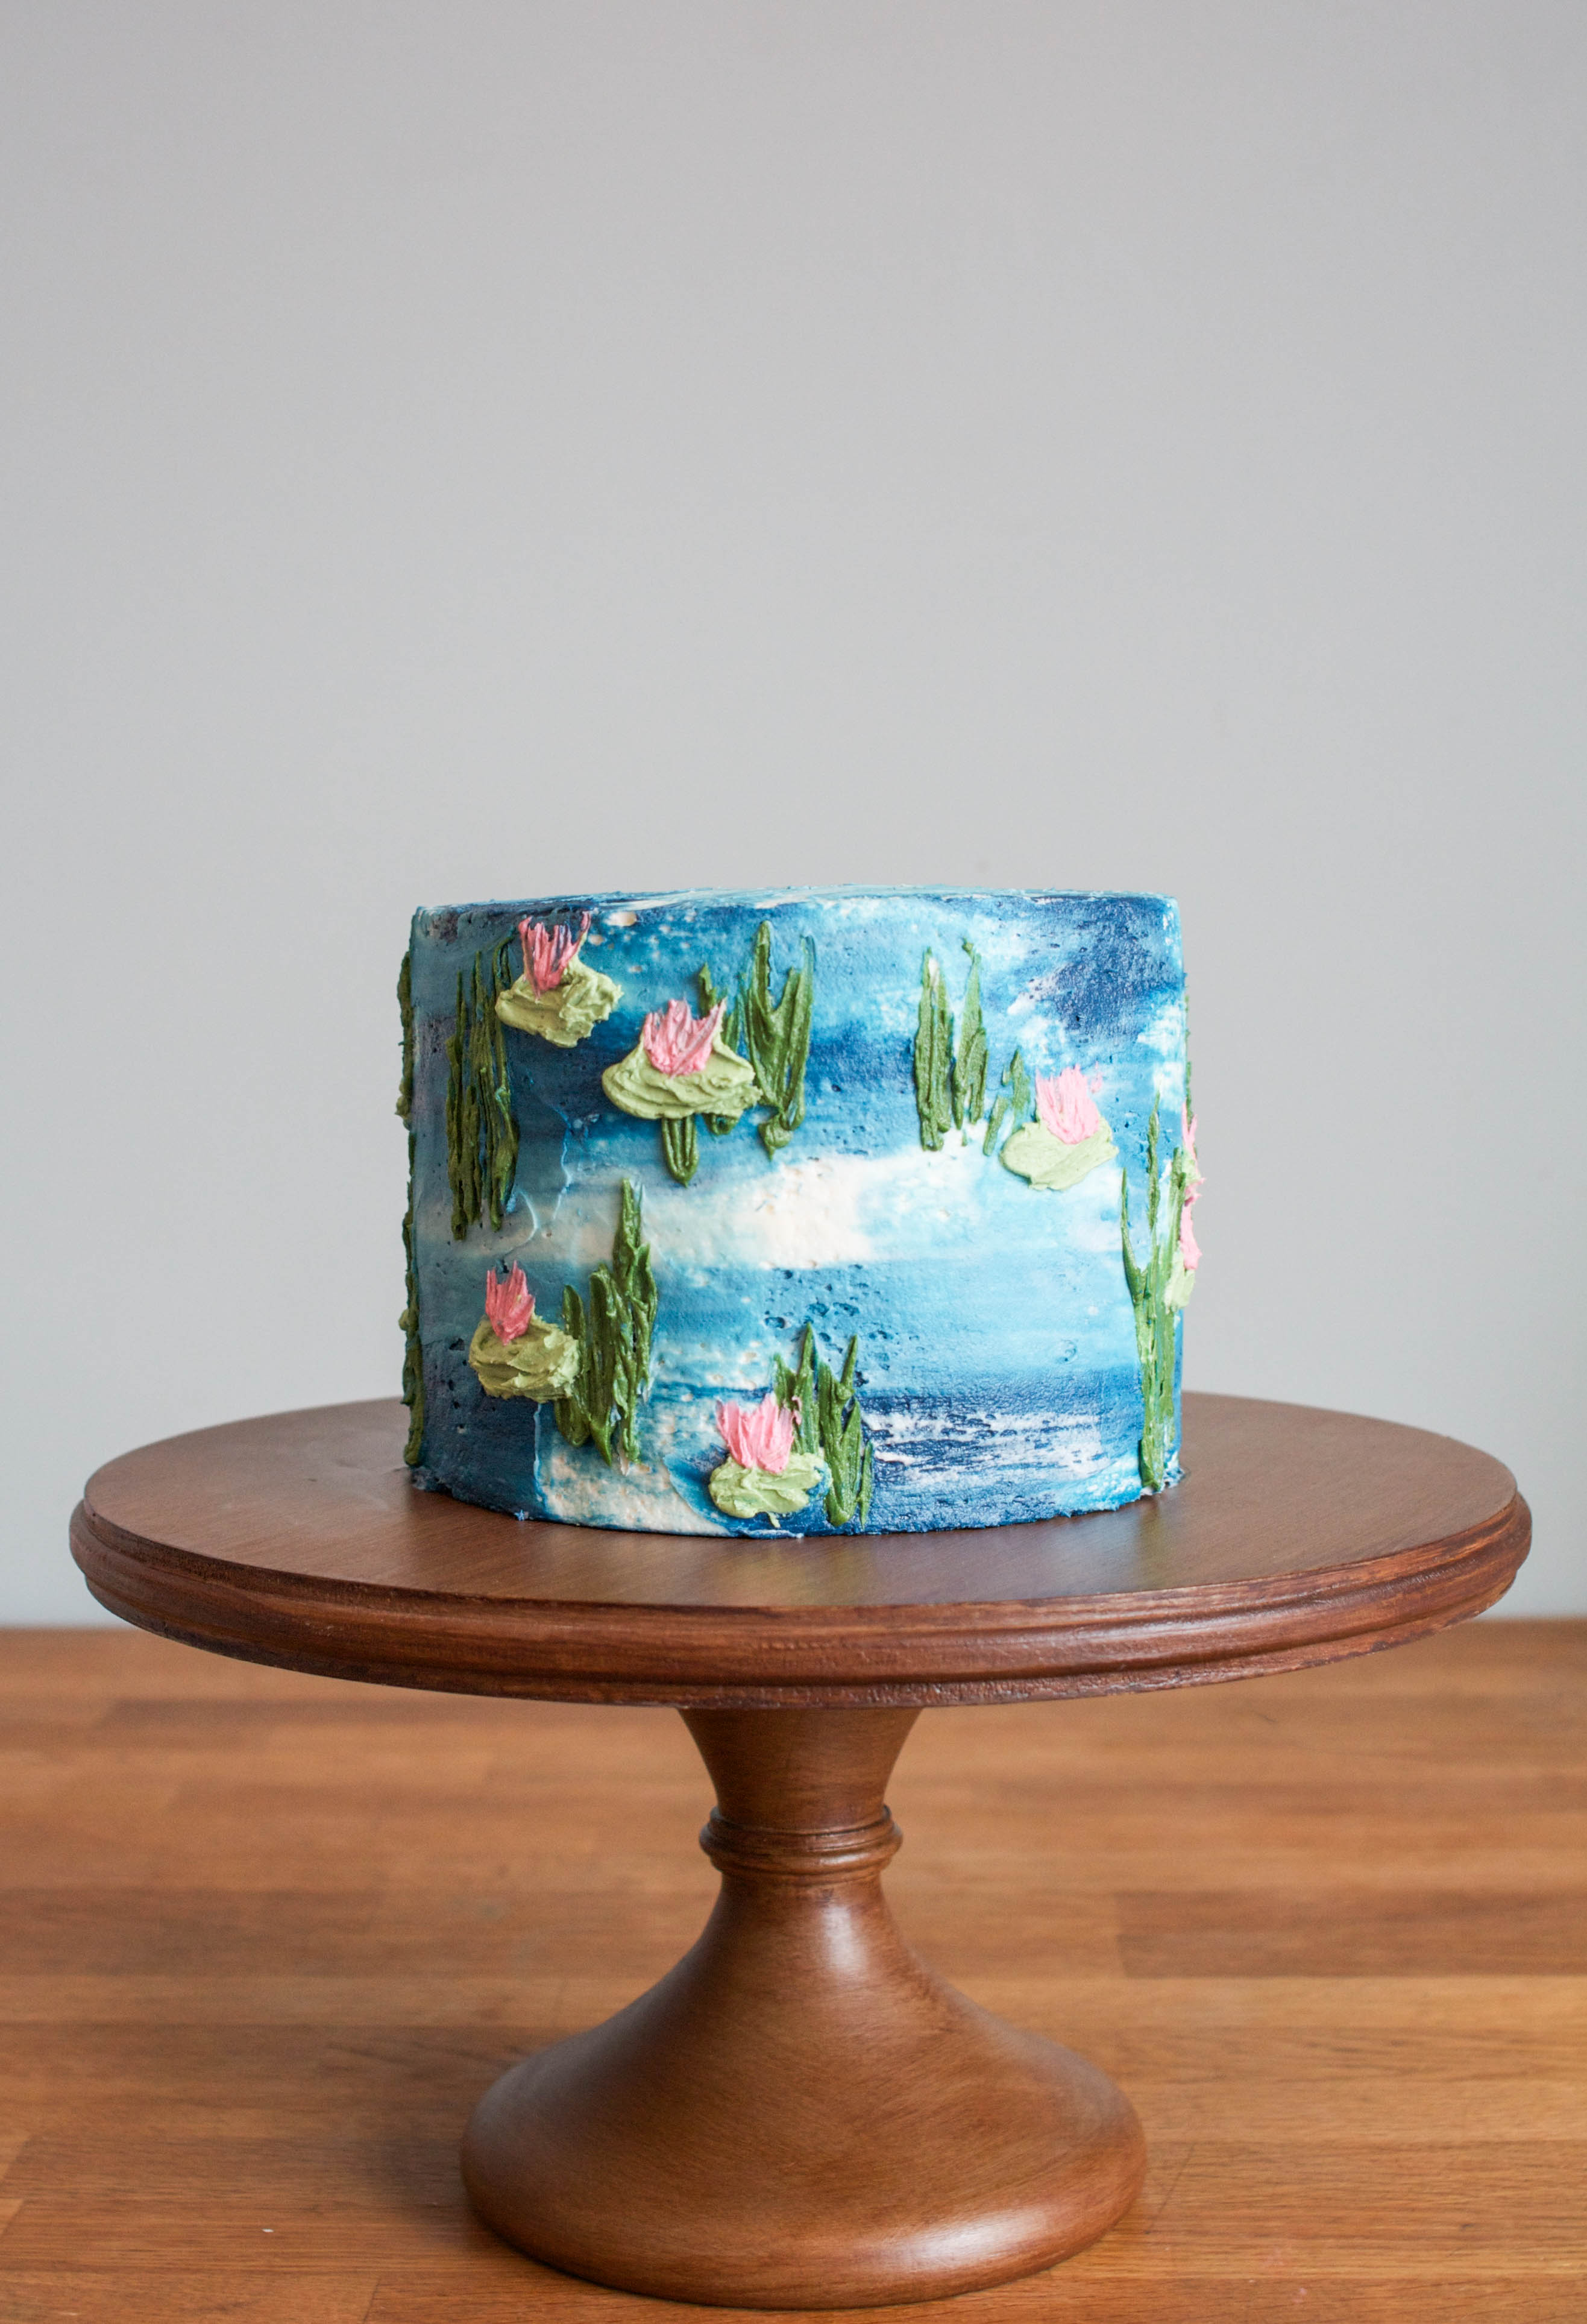 Hand-Painted Cakes Made Easy With Buttercream!